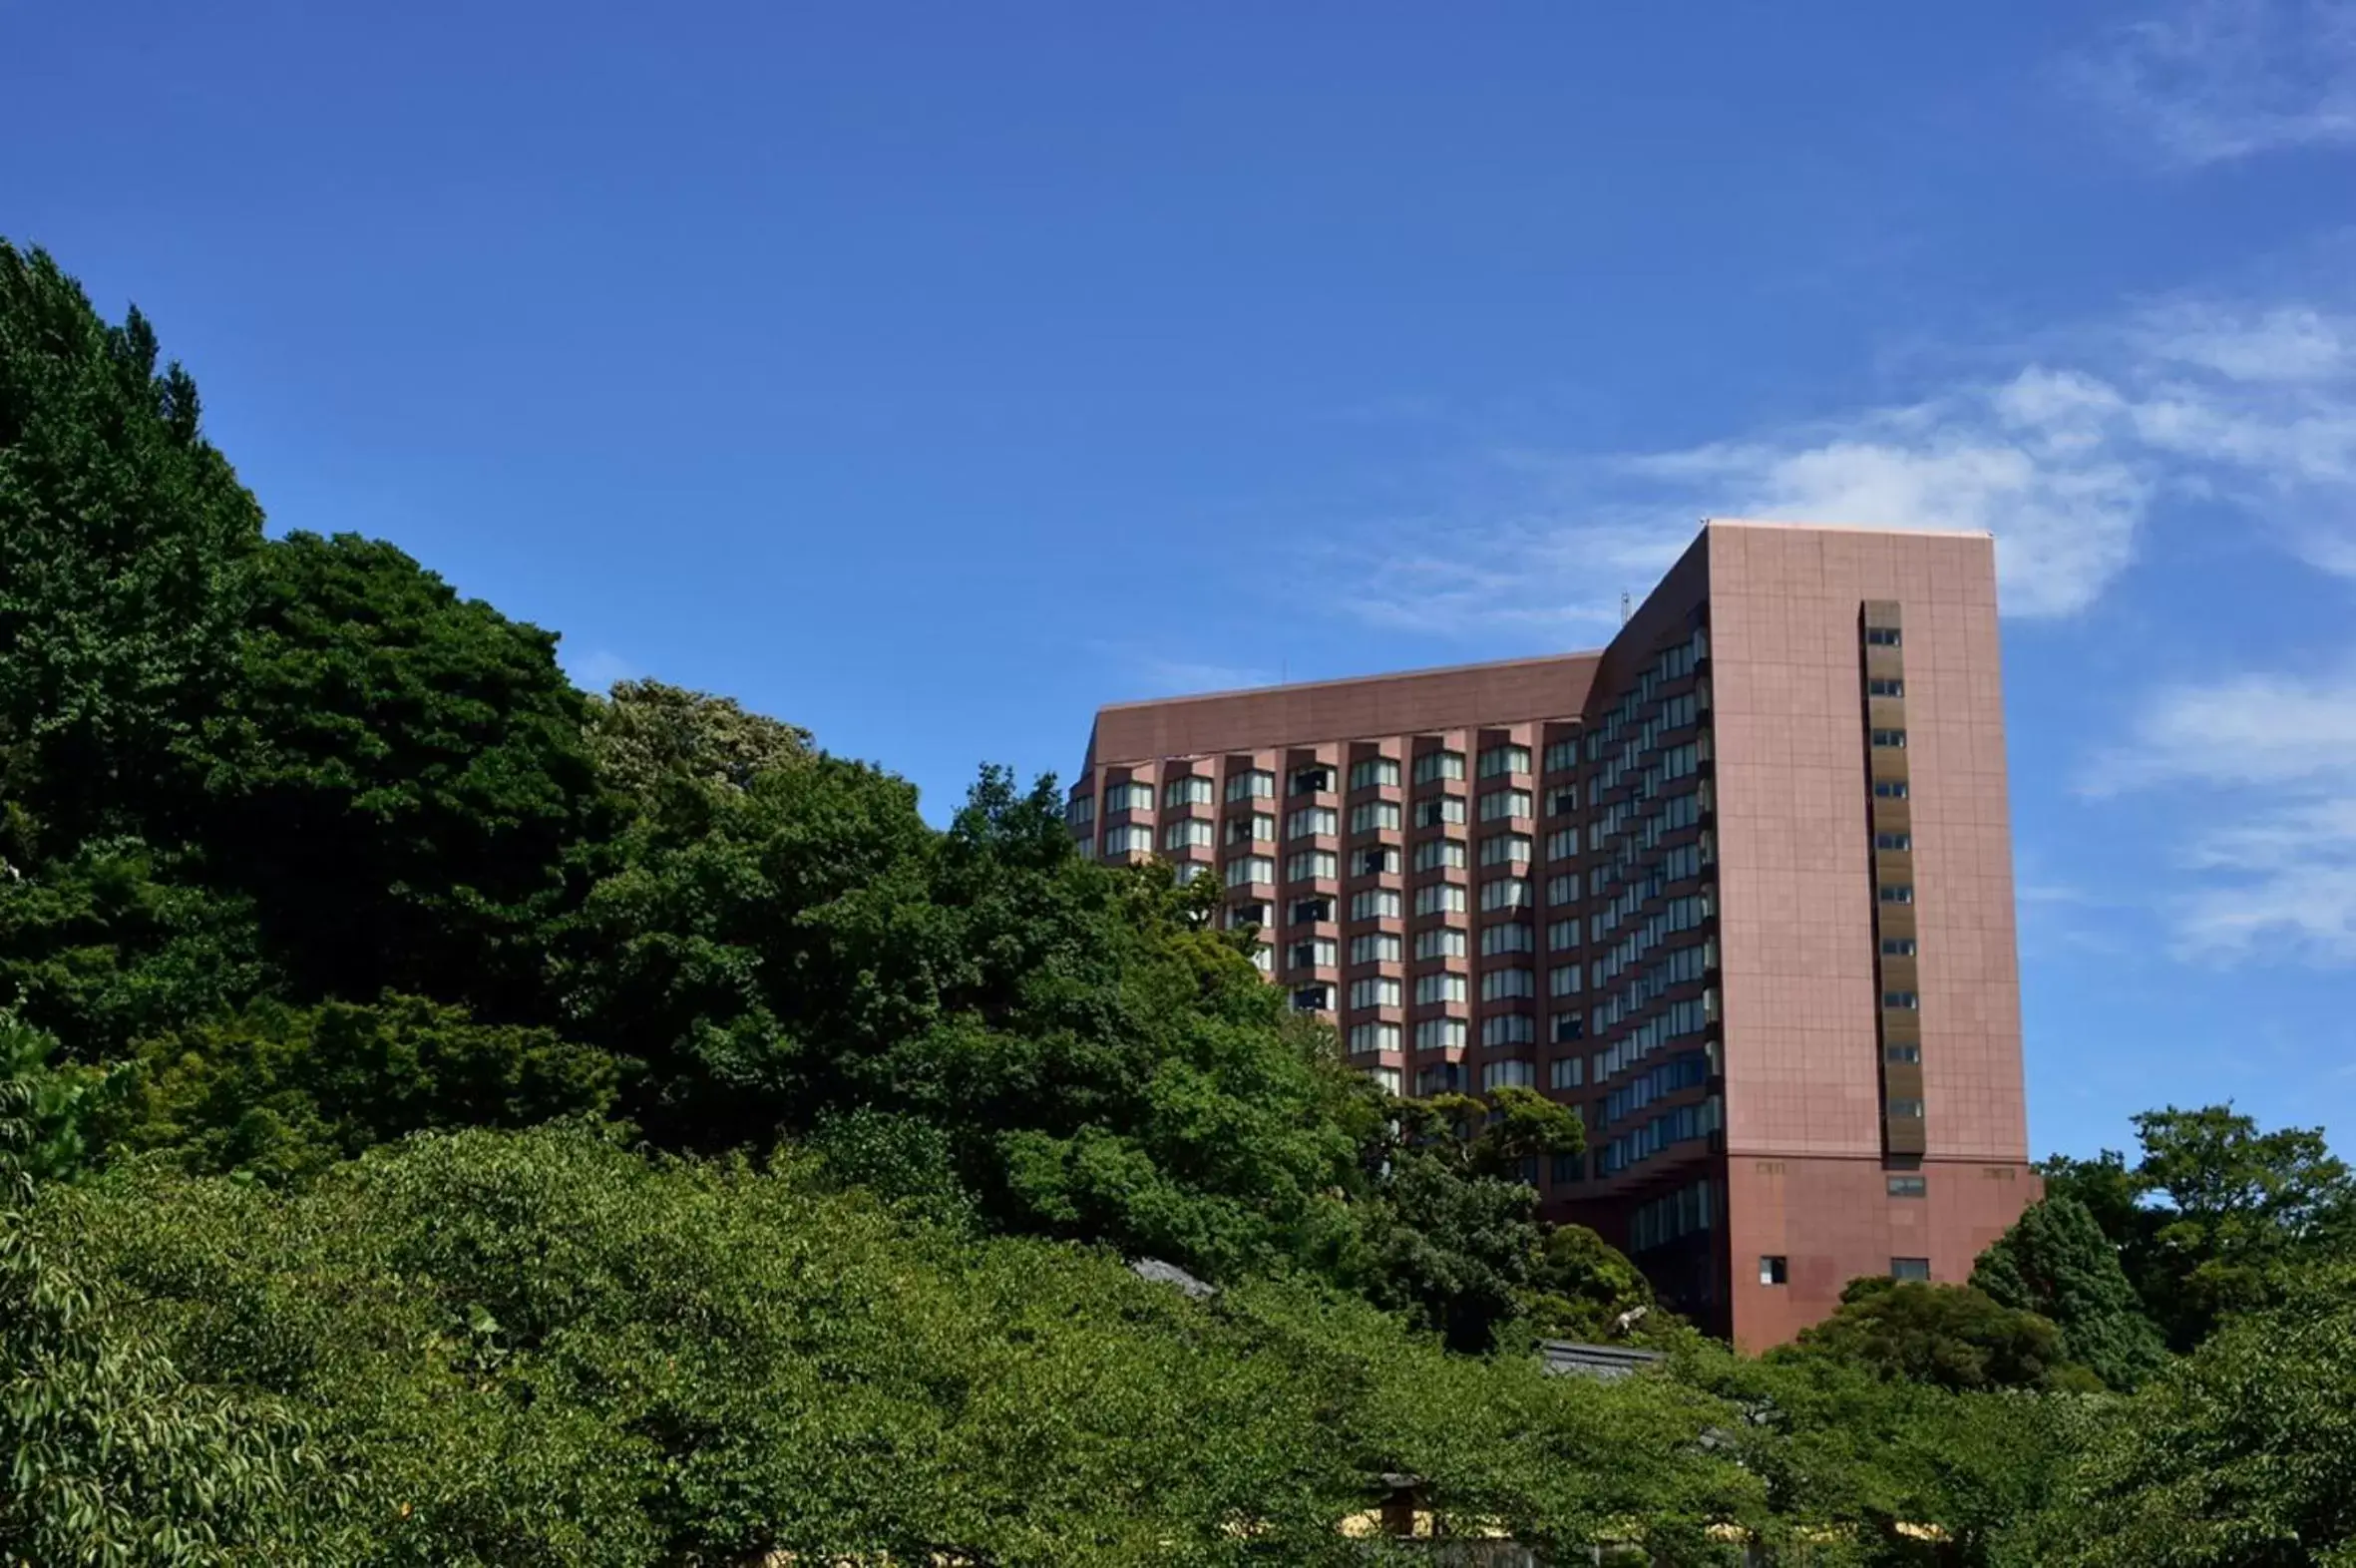 Property Building in Hotel Chinzanso Tokyo